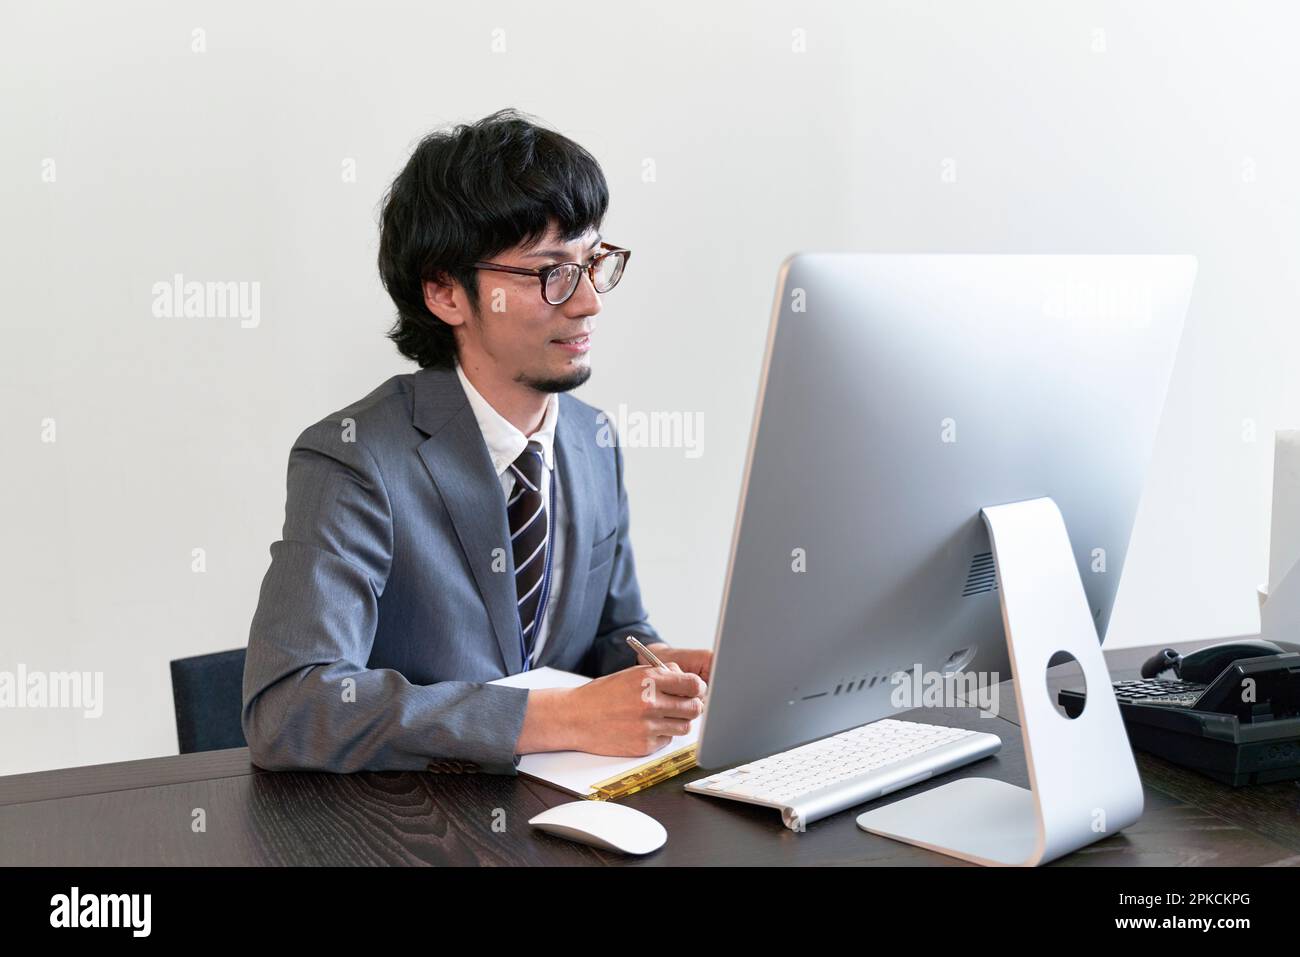 A male interviewer conducting an online interview on a computer Stock Photo